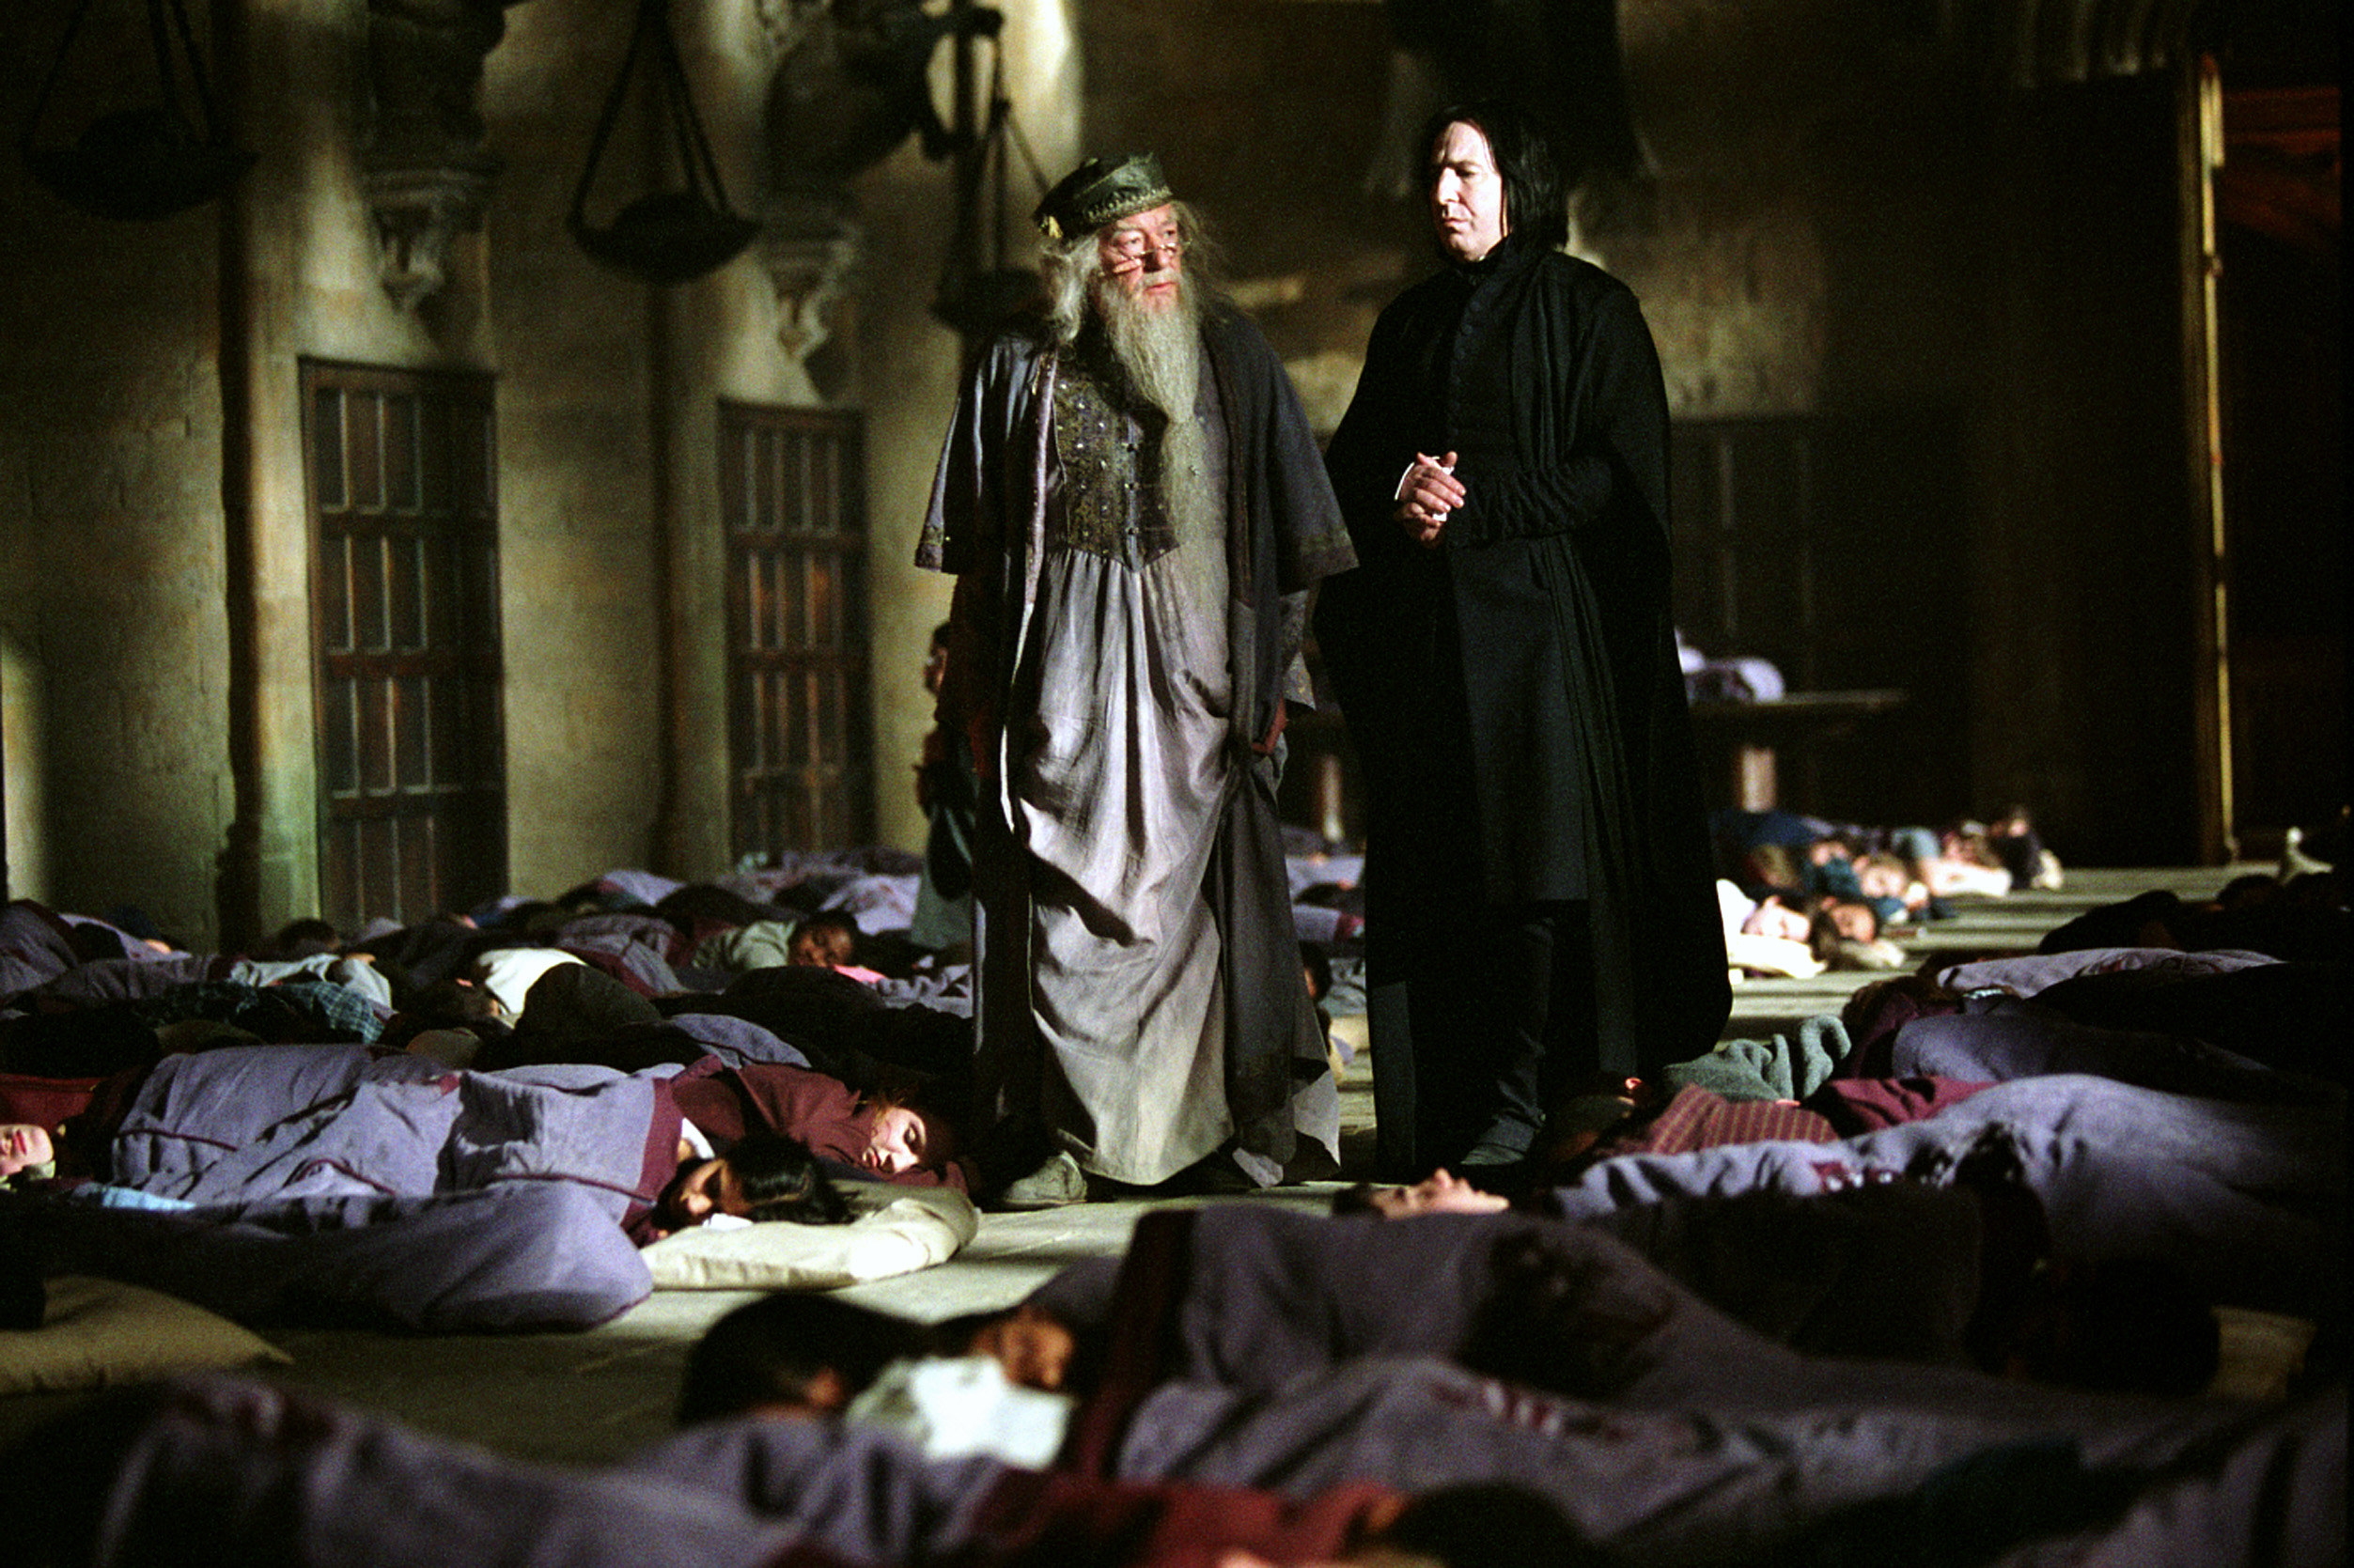 Michael Gambon and Alan Rickman presiding over a bunch of students in sleeping bags